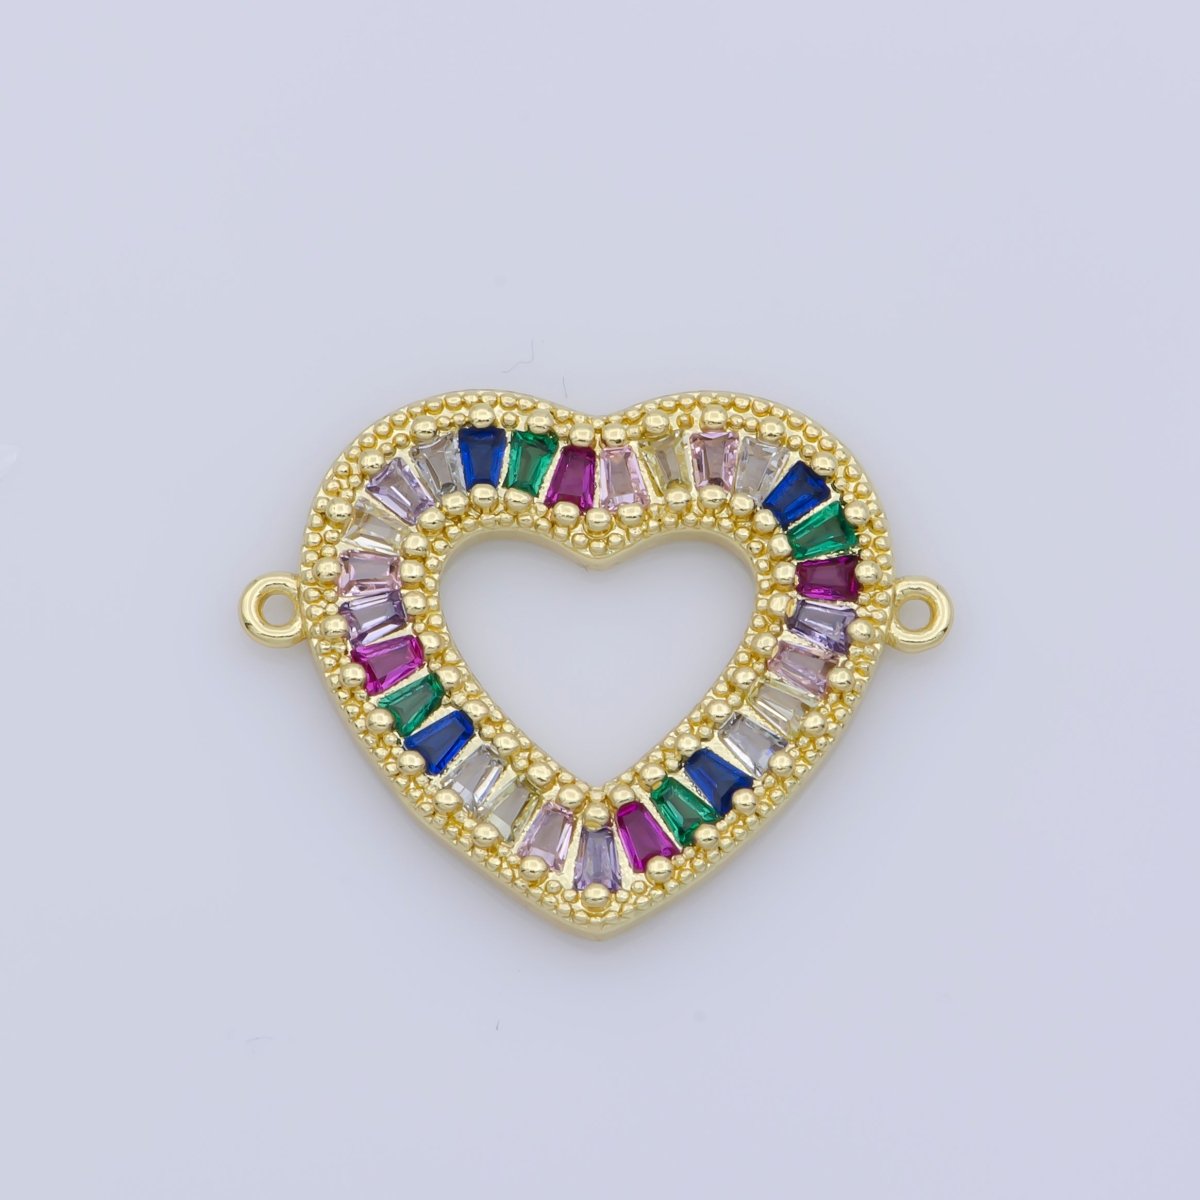 Colorful Baguette CZ Micro Pave Heart Shape Connector/Link, Cz Pave Bracelet Necklace Connector in 14k Gold Filled F-346 - DLUXCA